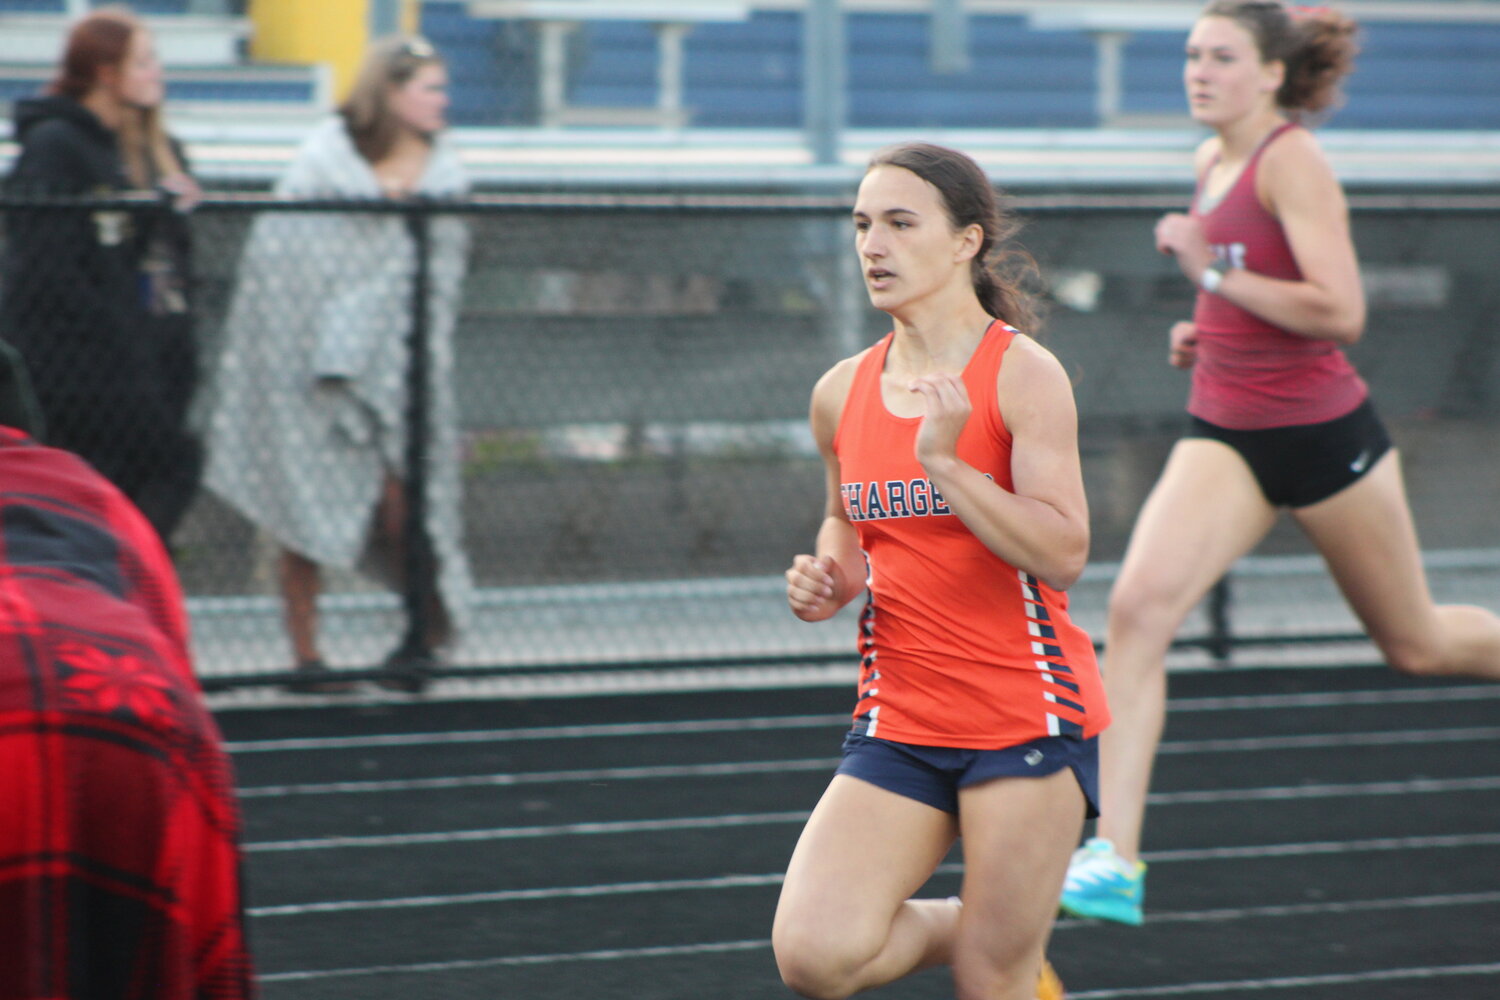 North Montgomery sophomore Ella McManomy gave the Chargers a second place finish in the 400.